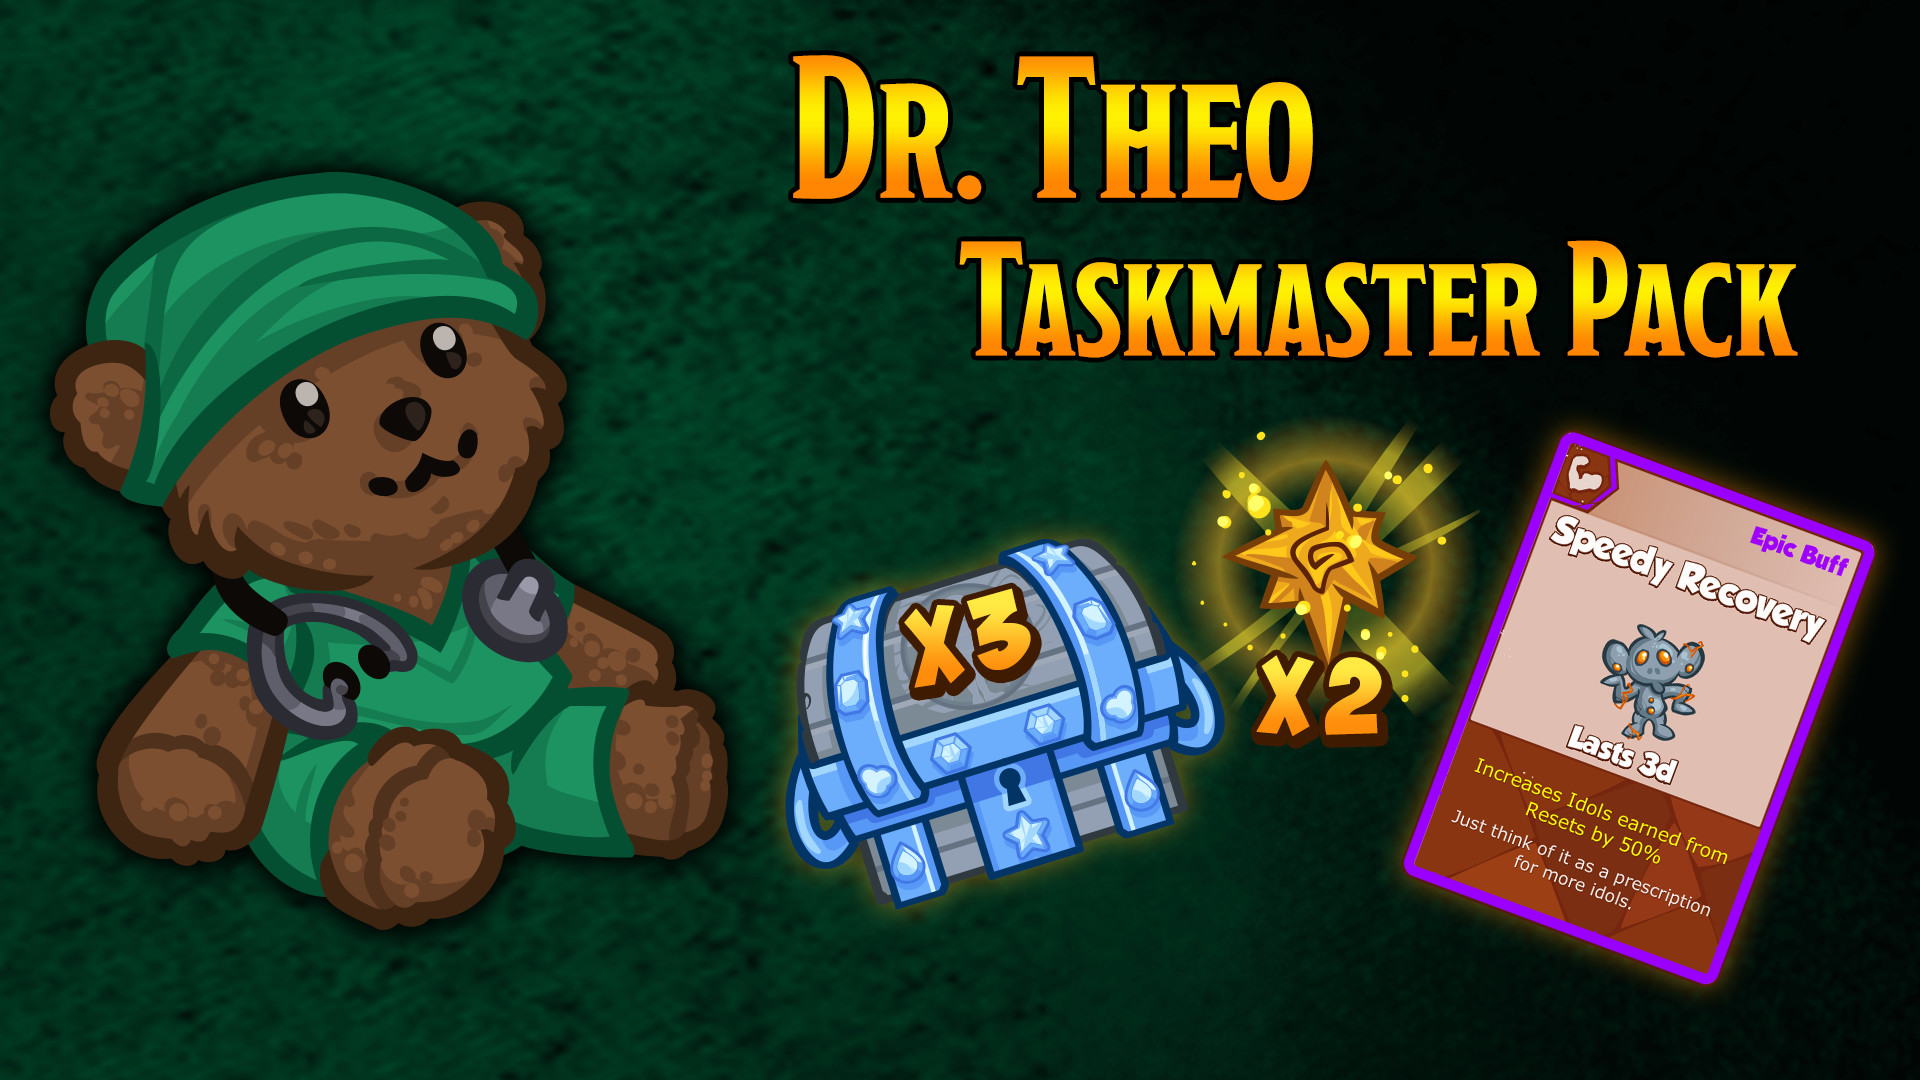 Crusaders of the Lost Idols: Dr. Theo Taskmaster Pack Featured Screenshot #1